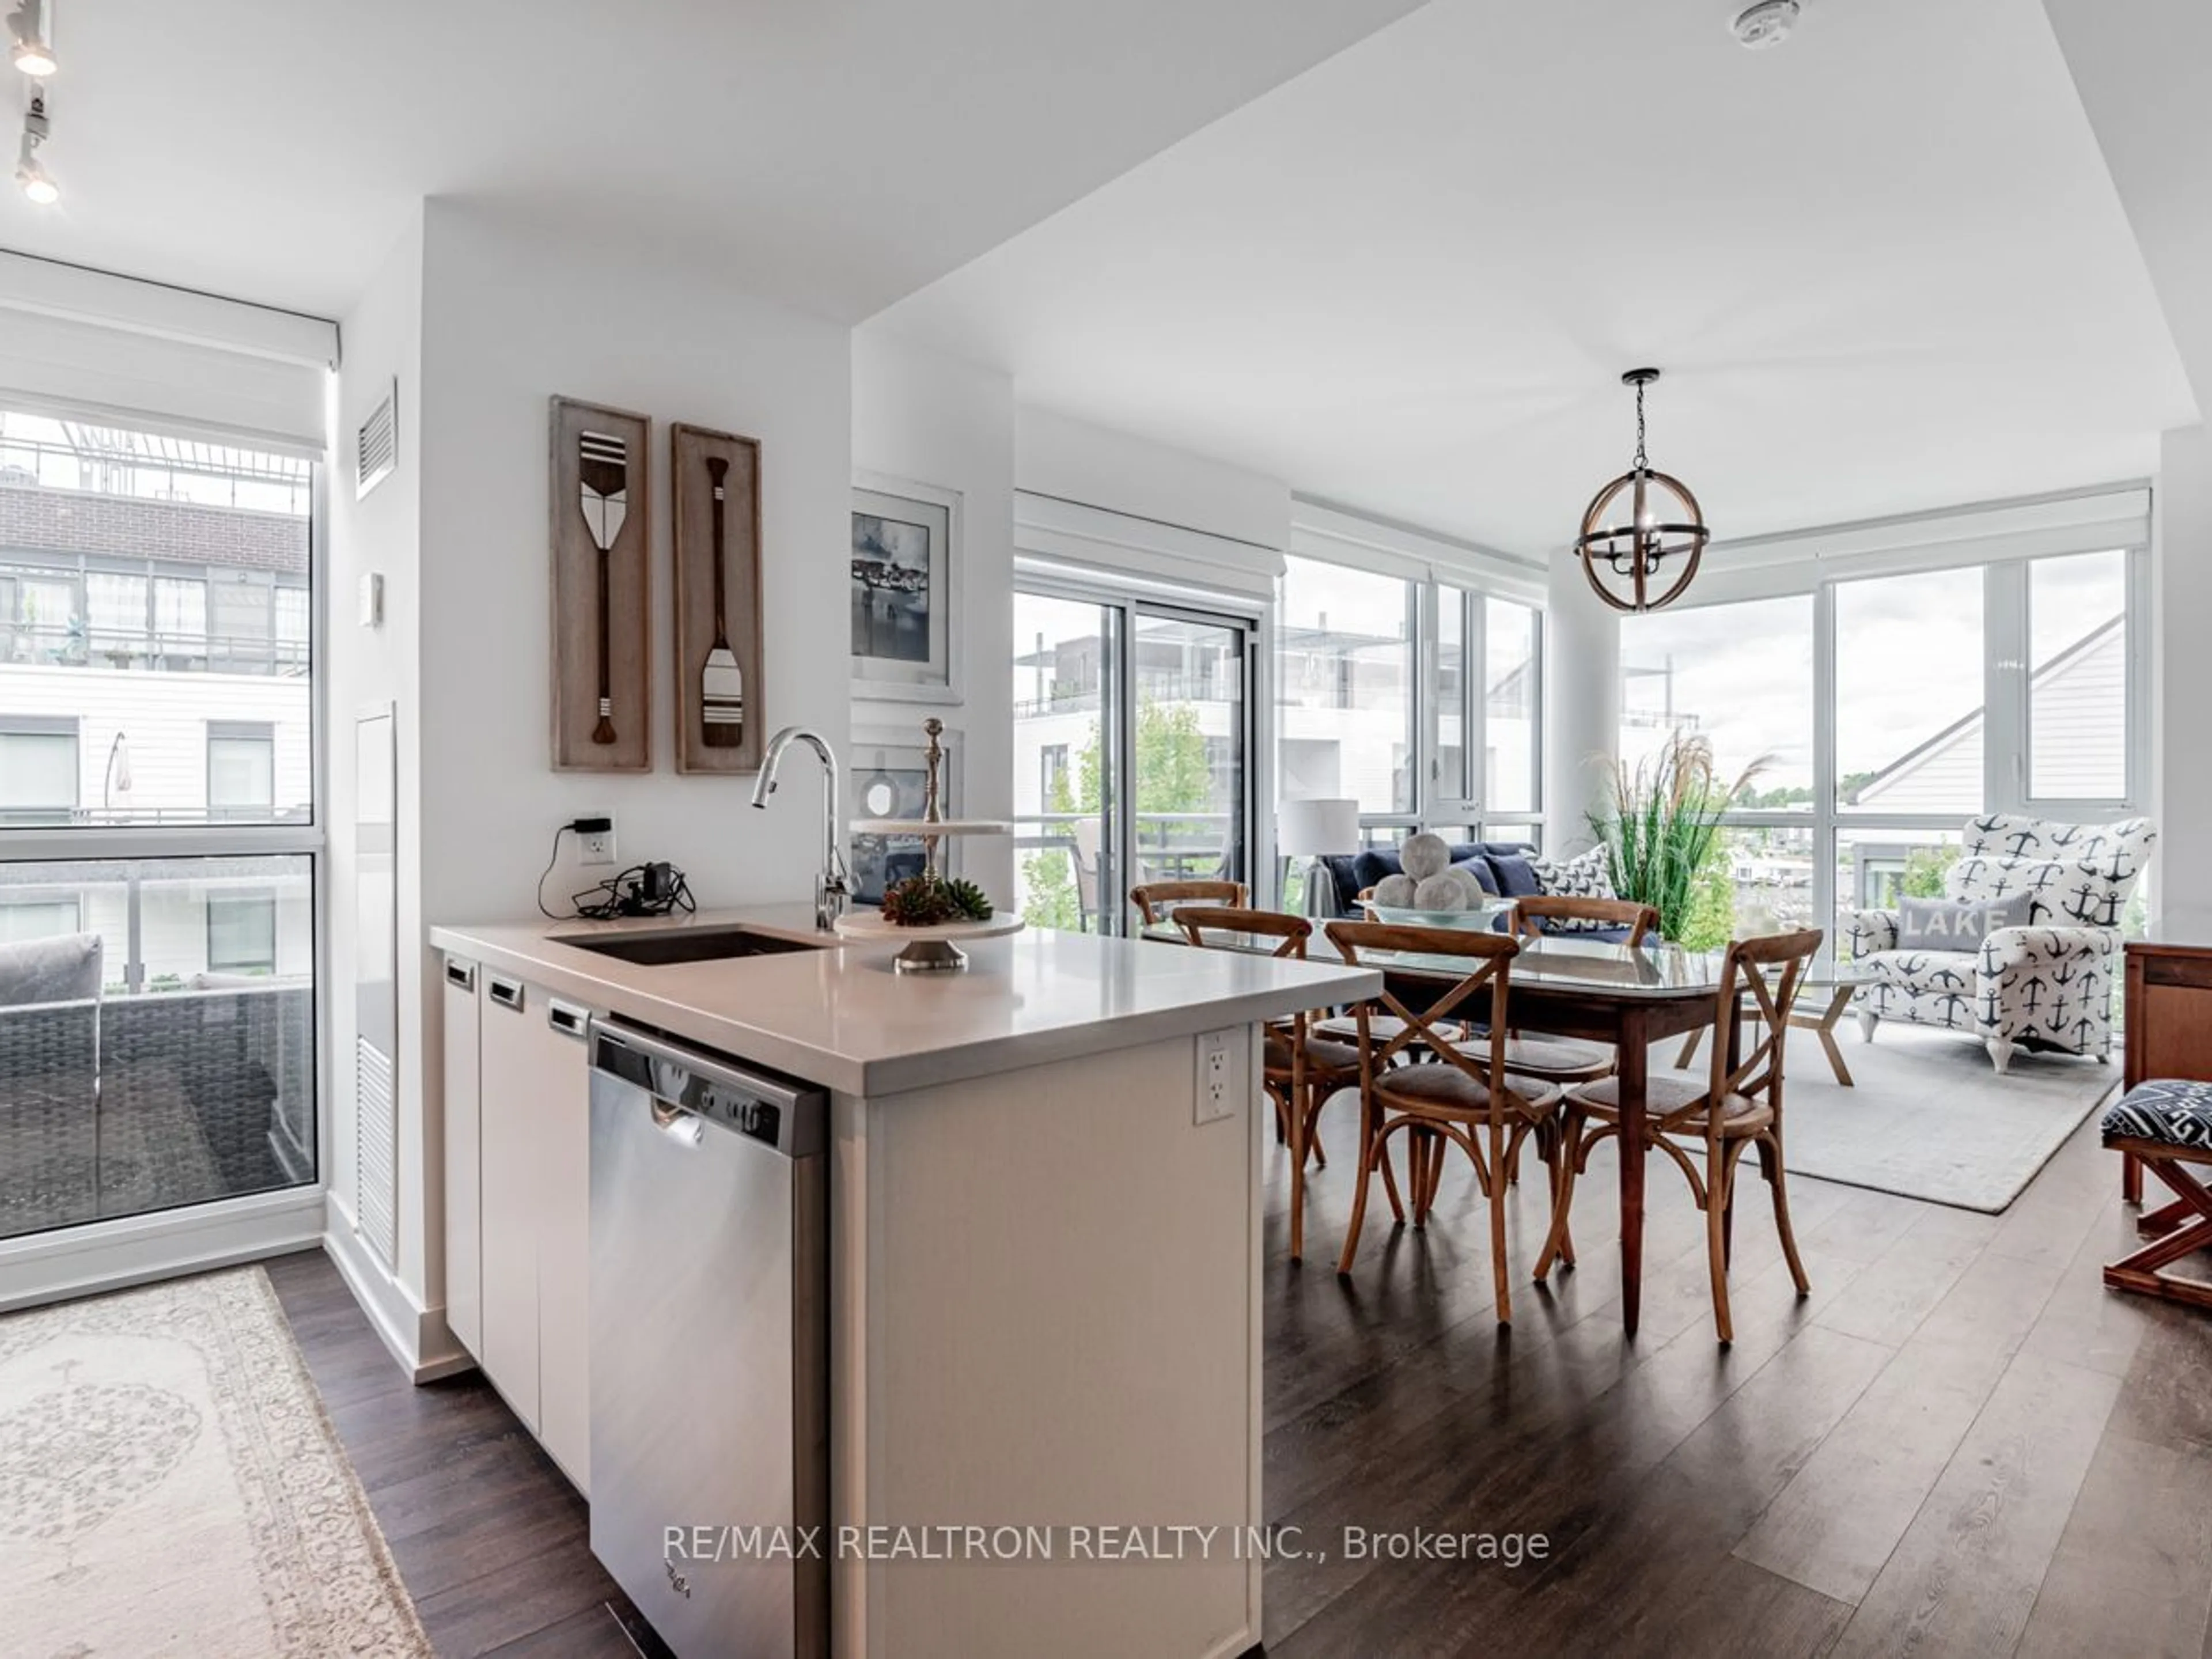 Contemporary kitchen for 271 Sea Ray Ave #B307, Innisfil Ontario L9S 0L8